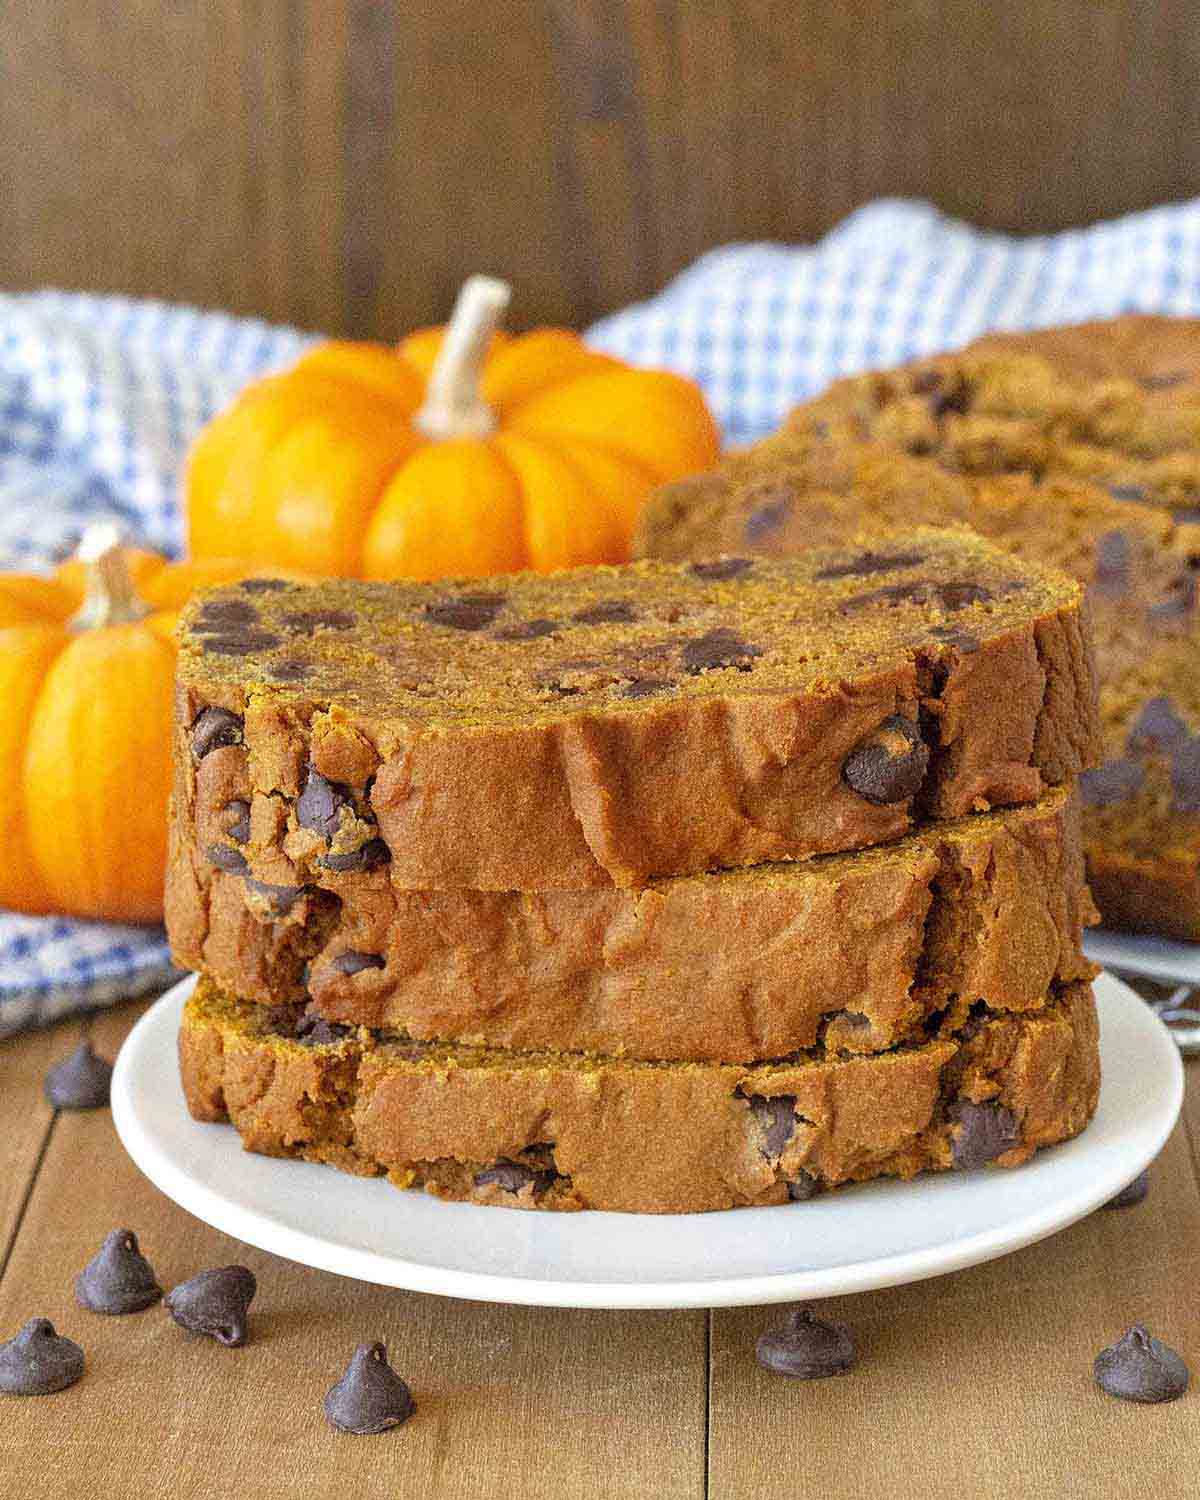 A stack of three vegan gluten free pumpkin bread slices on a plate.